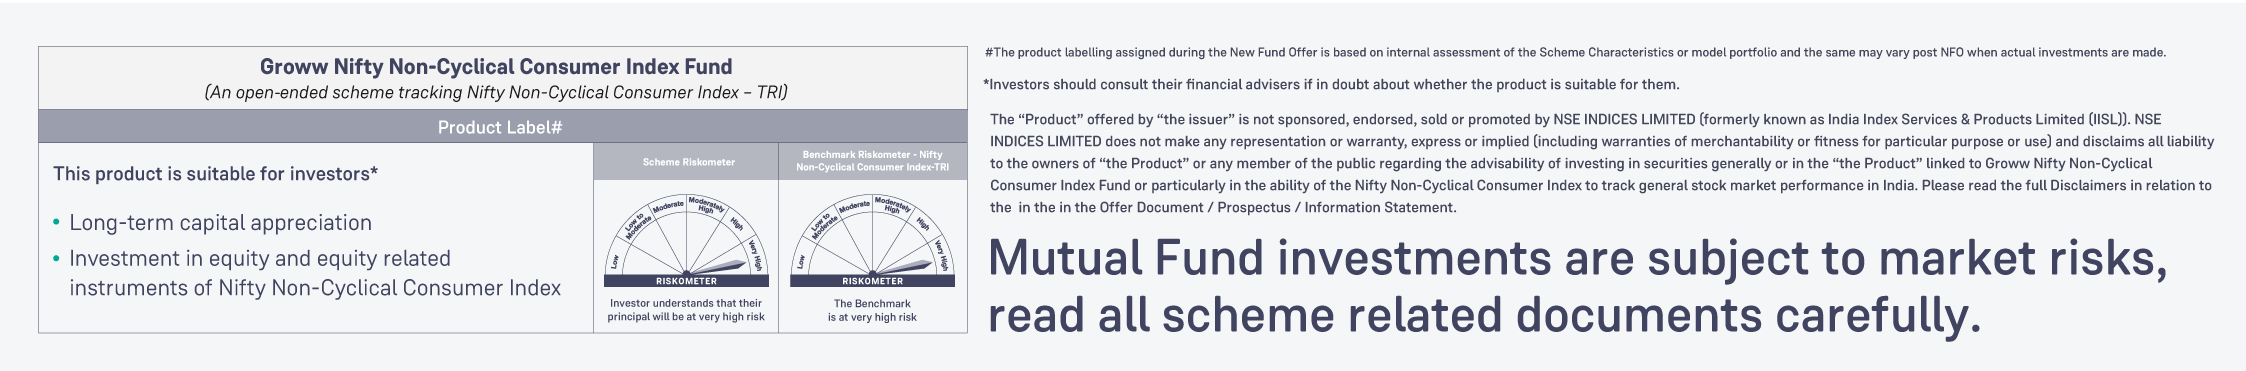 ProductLabel_Groww-Non-Cyclical-Consumer-Index-Fund (2).png